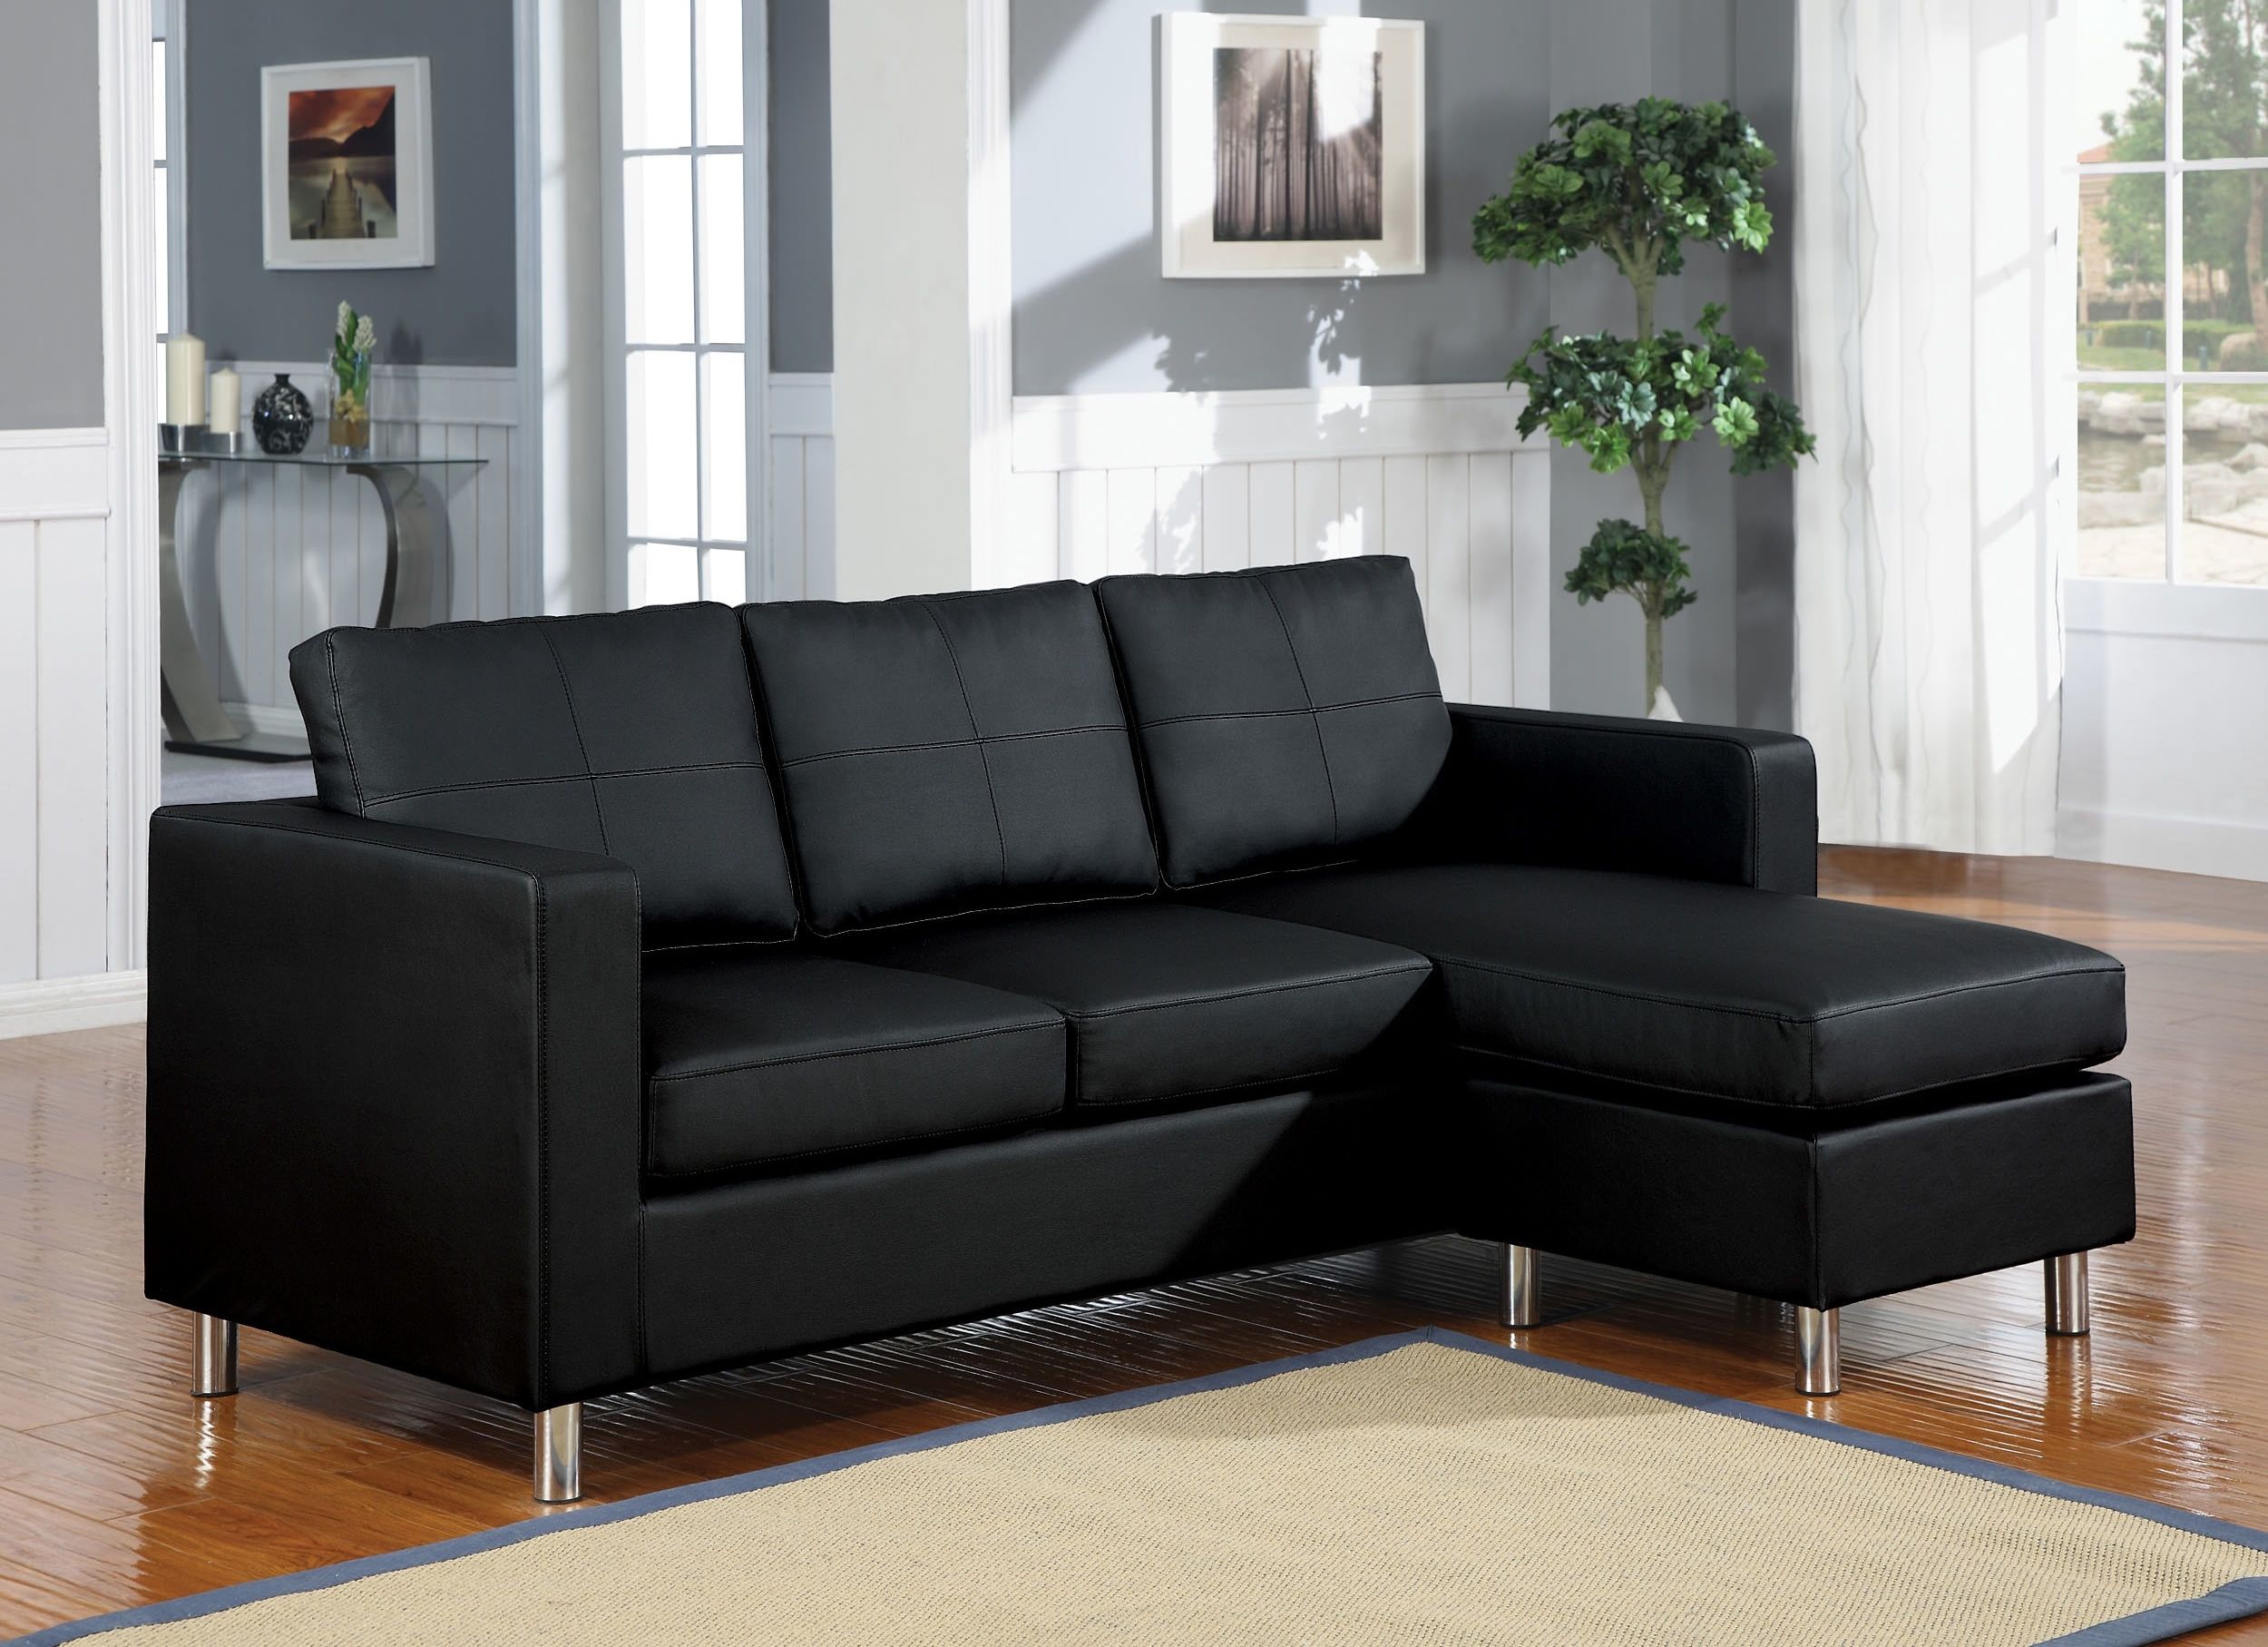 Sofa : Small Sectional Sofa With Chaise Lounge Suede Sectional With Narrow Spaces Sectional Sofas (View 10 of 10)